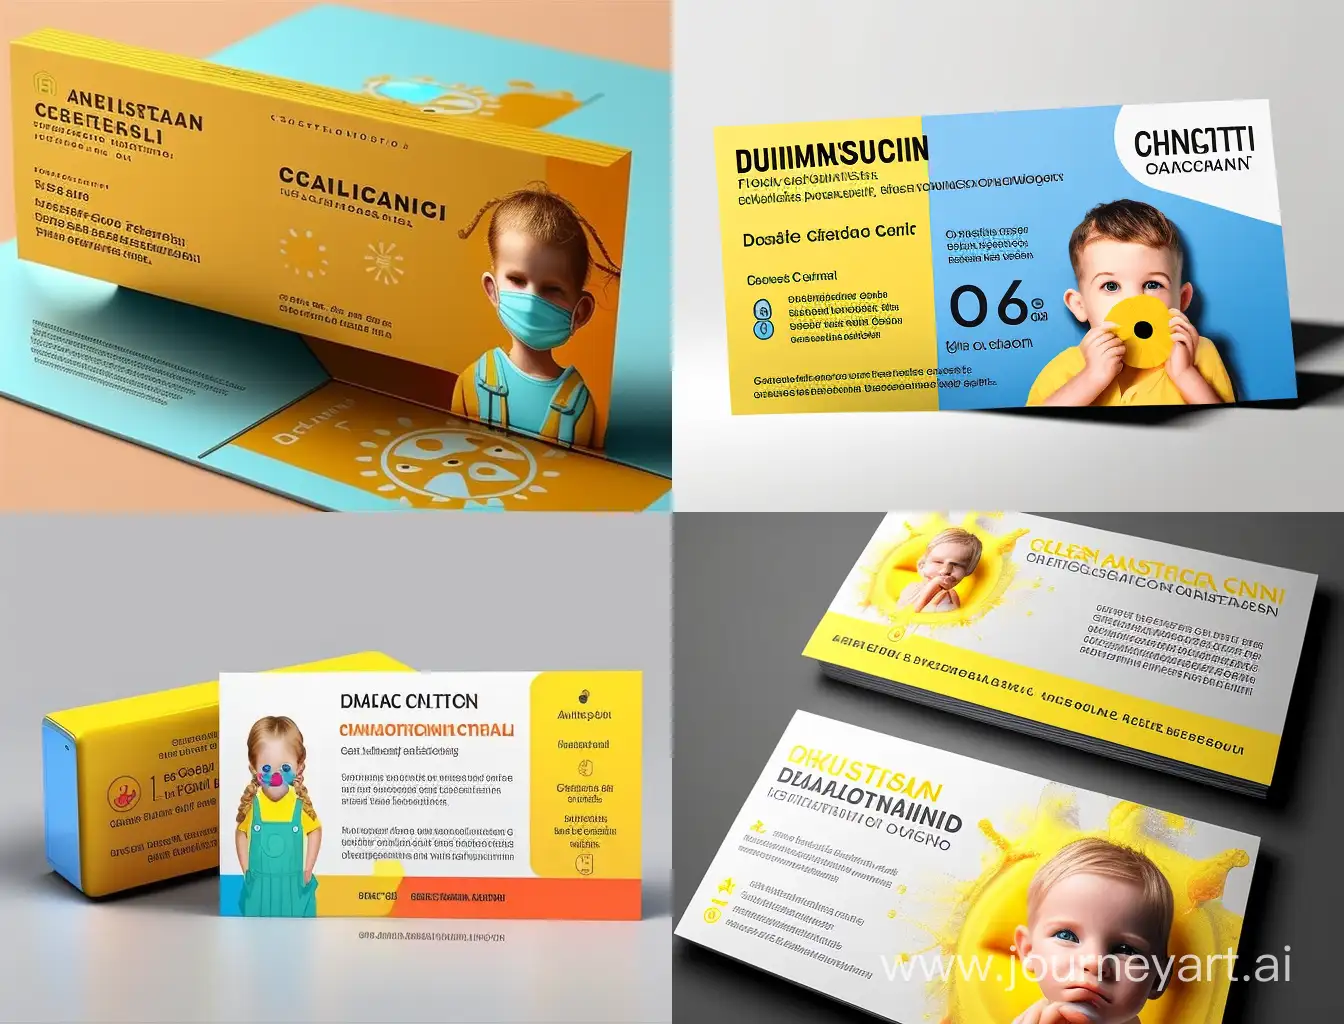 Air-Conditioner-Disinfection-Business-Card-with-Children-and-Adults-in-a-Sunny-Setting